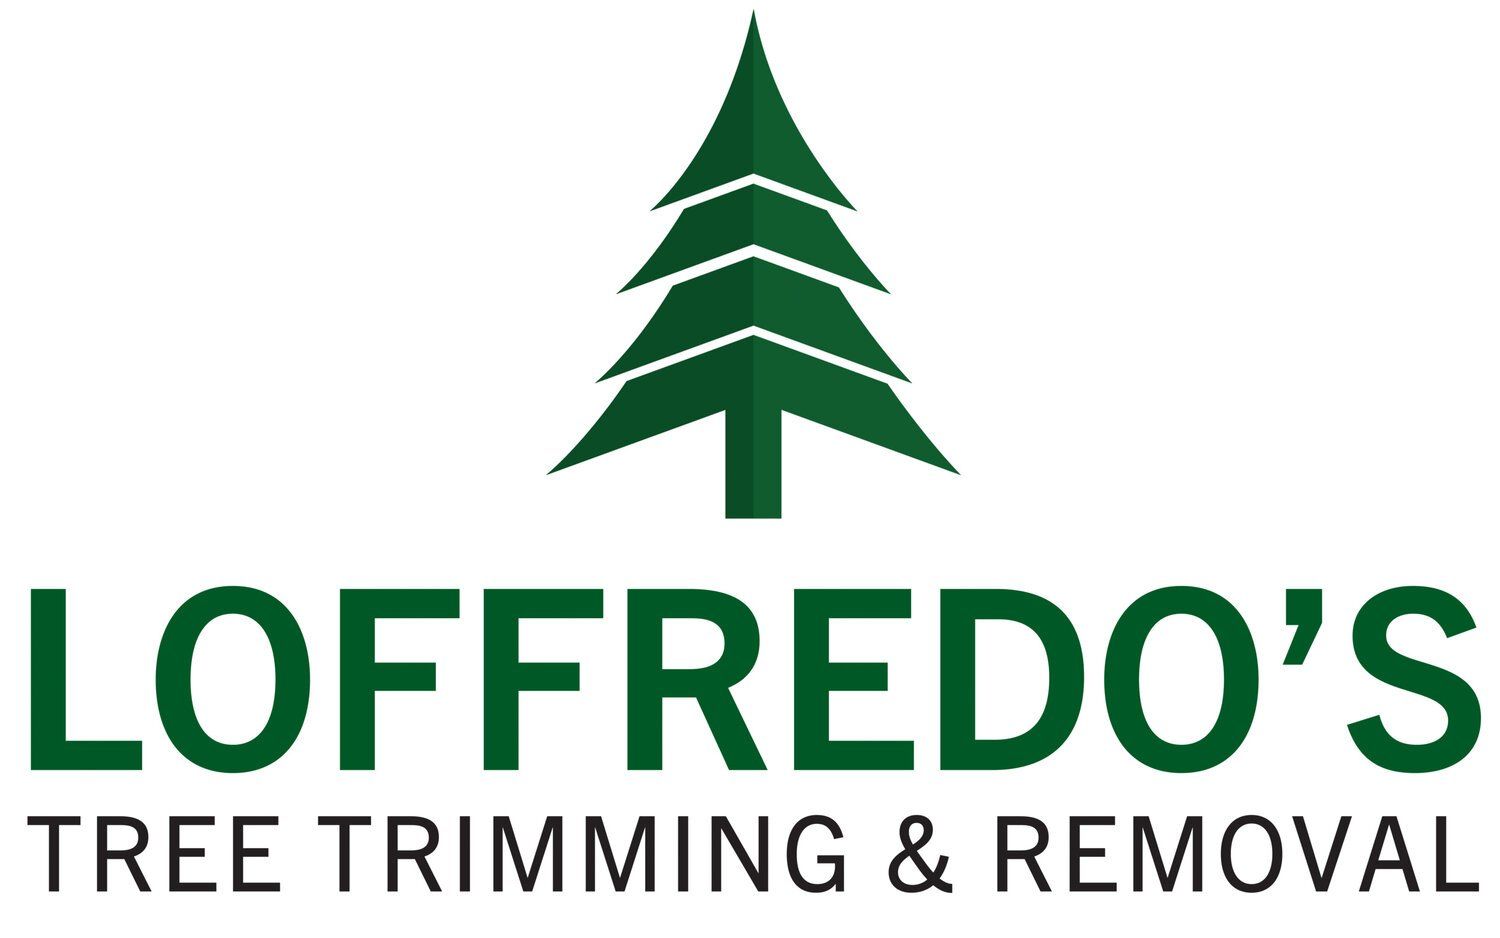 Loffredo's tree trimming and removal logo